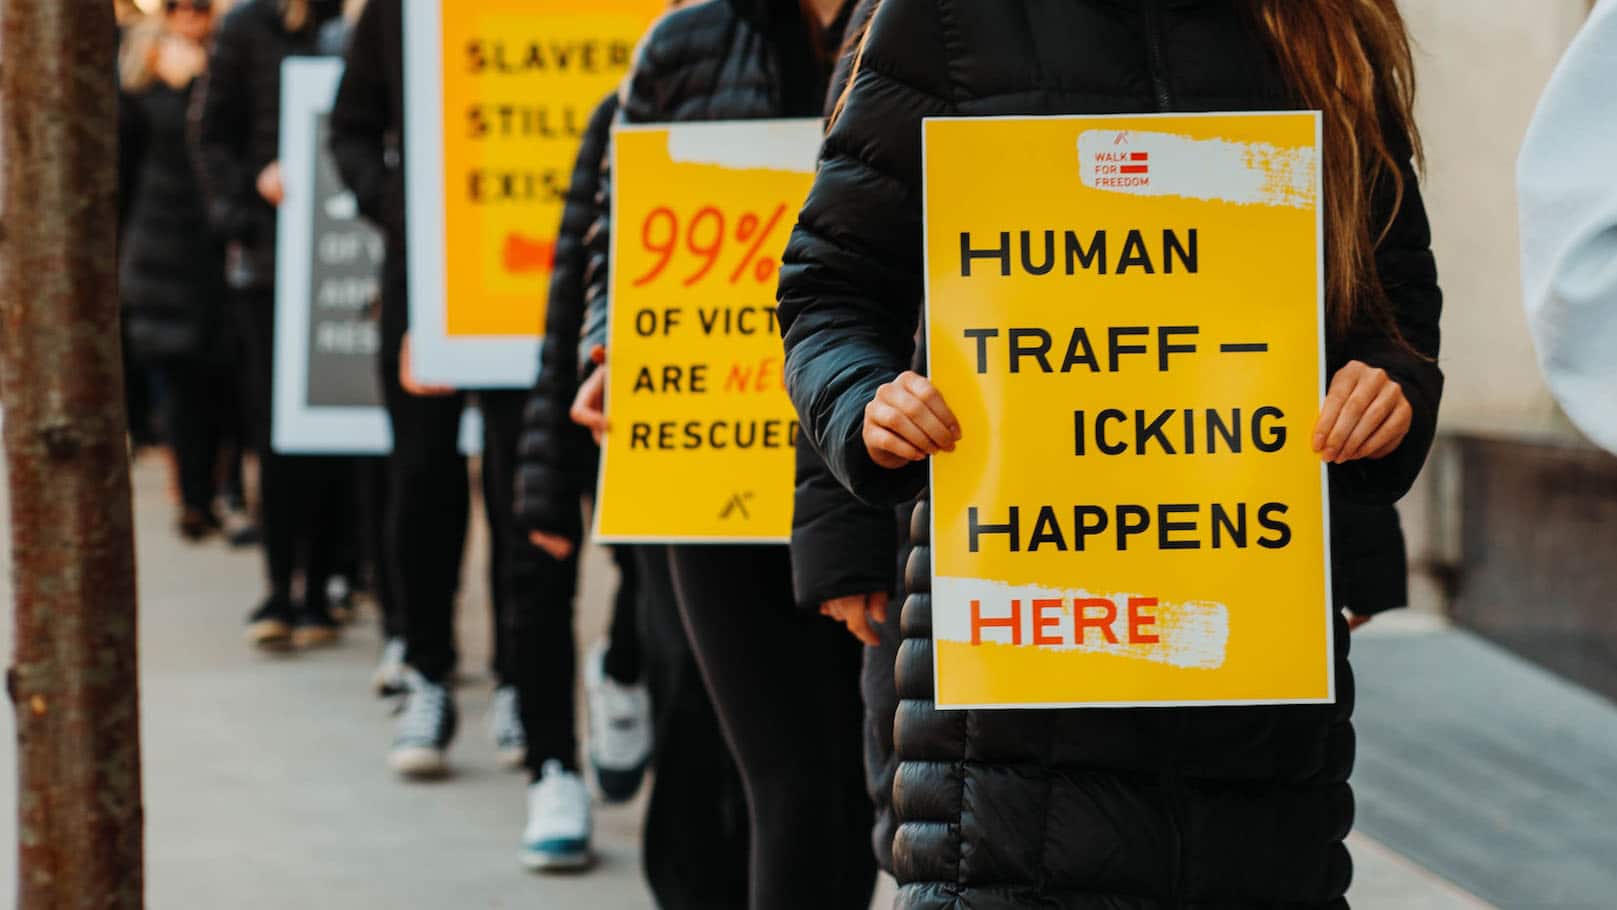 a line of protesters in dark clothing carry yellow signs that read "human trafficking happens here"